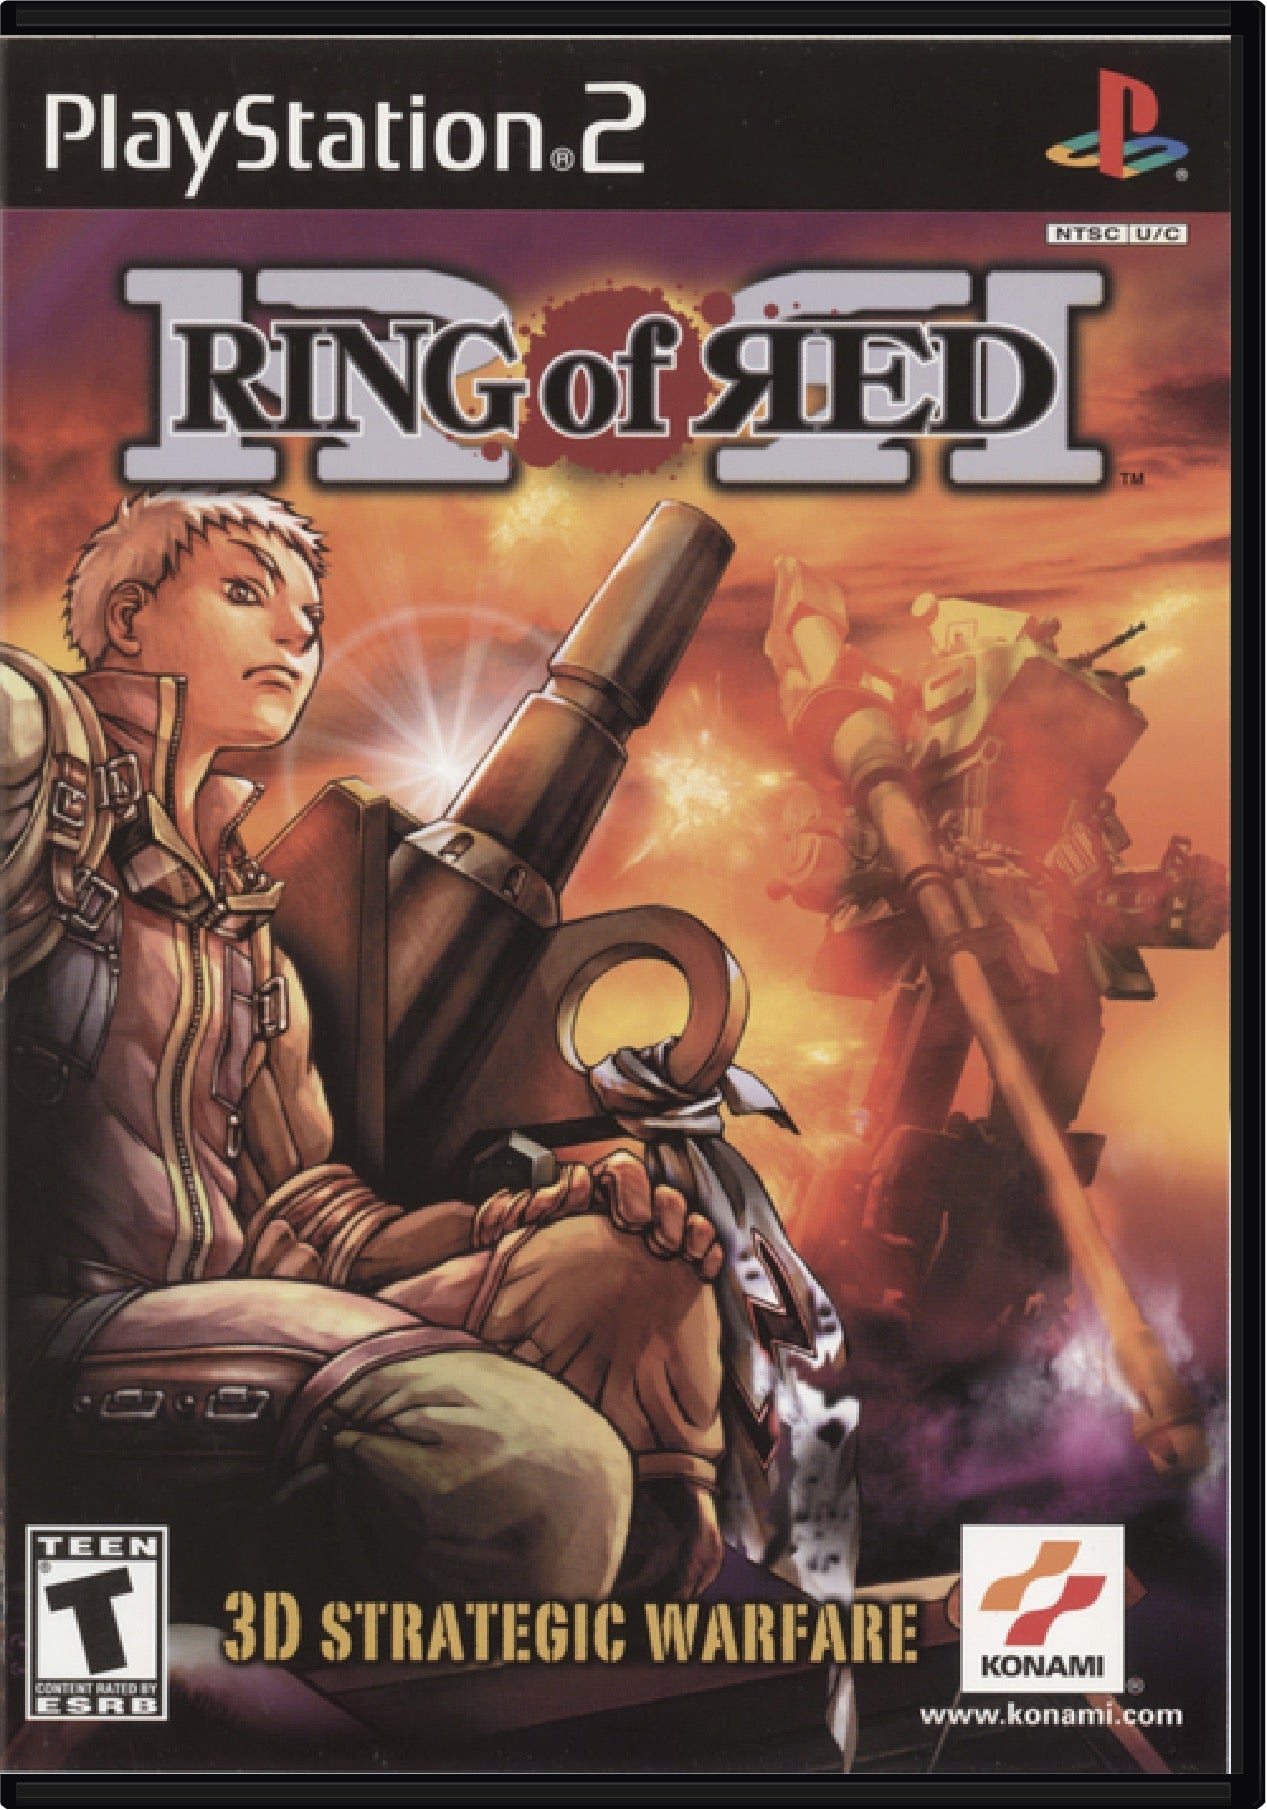 Ring of Red Cover Art and Product Photo